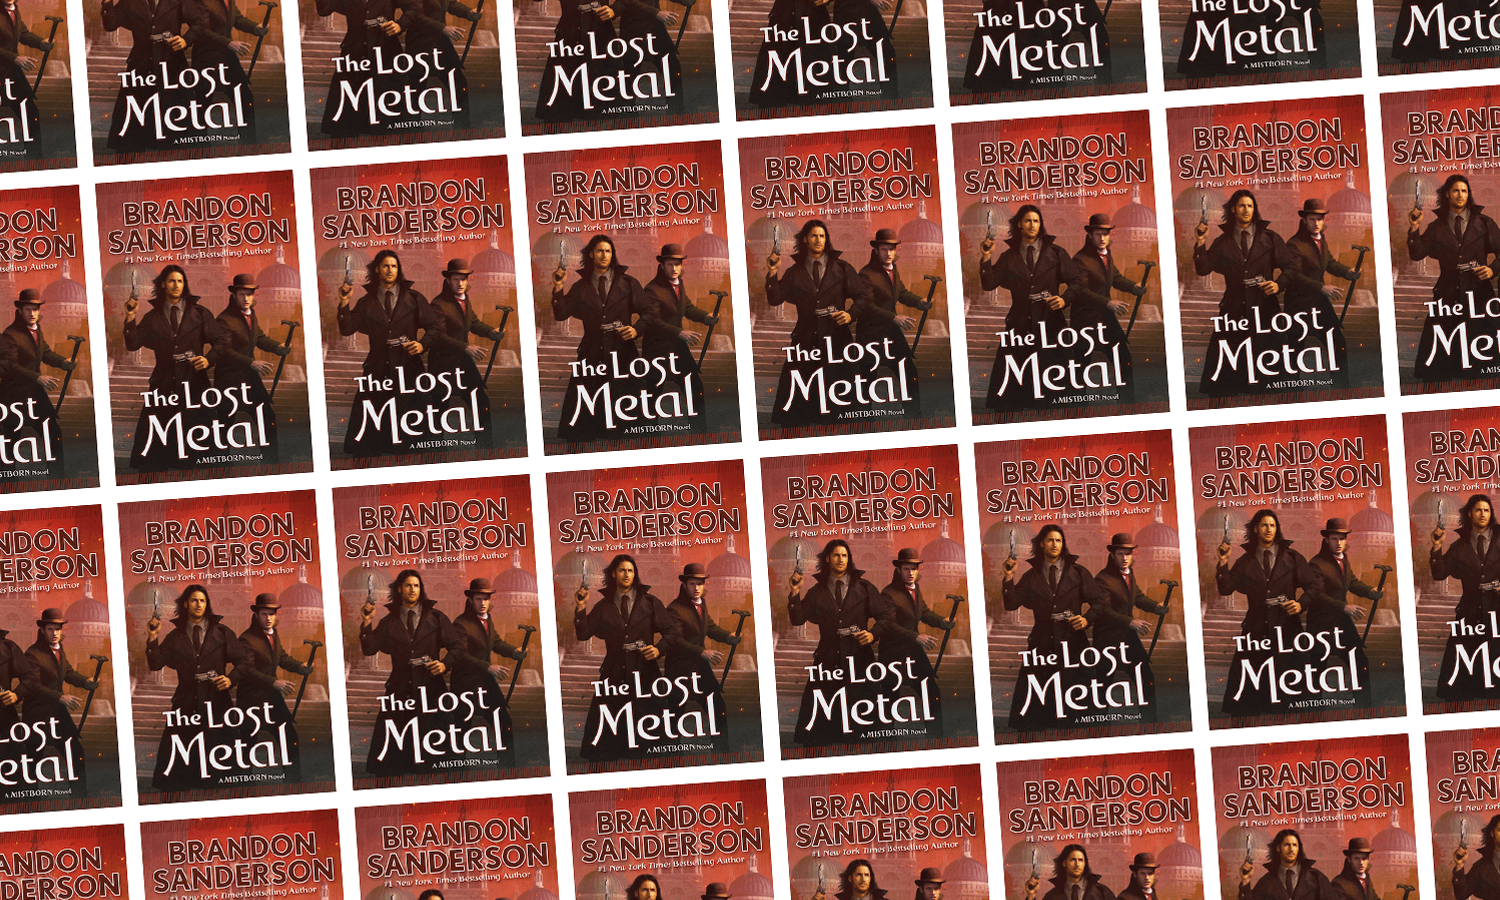 The Lost Metal: Book 7 Of The Mistborn Series By Brandon Sanderson